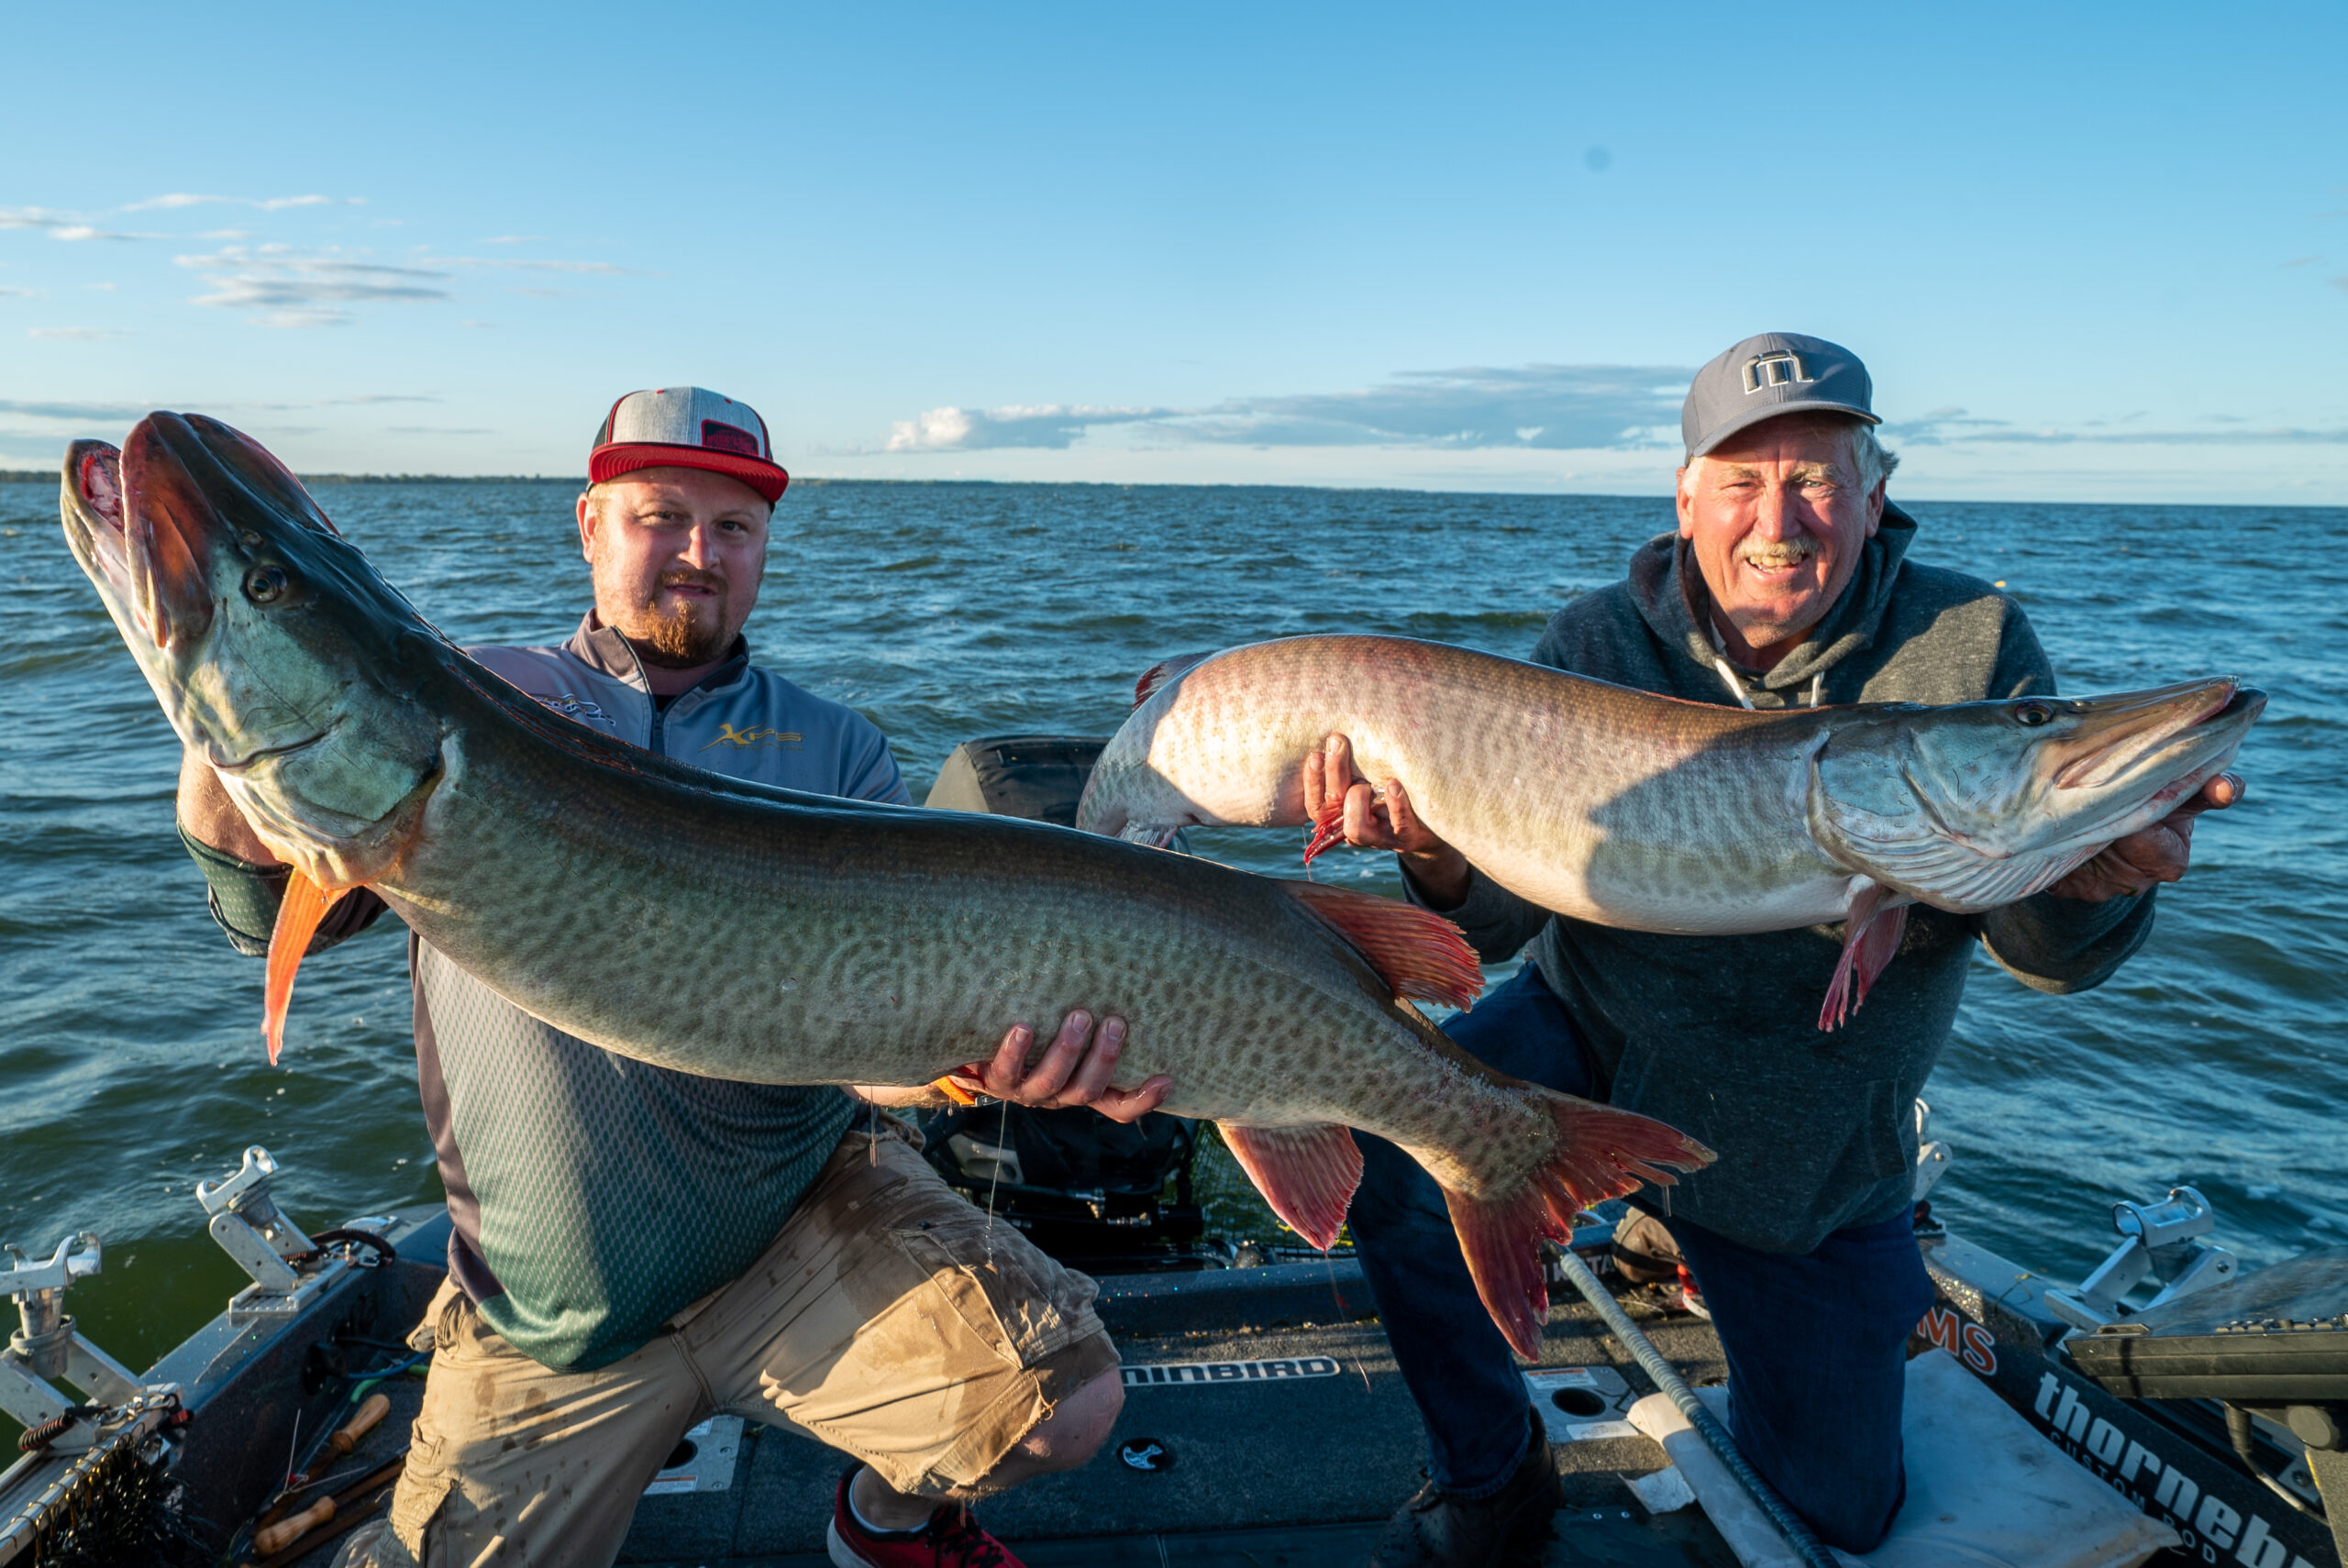 These two giant muskies were netted simultaneously in Green Bay.